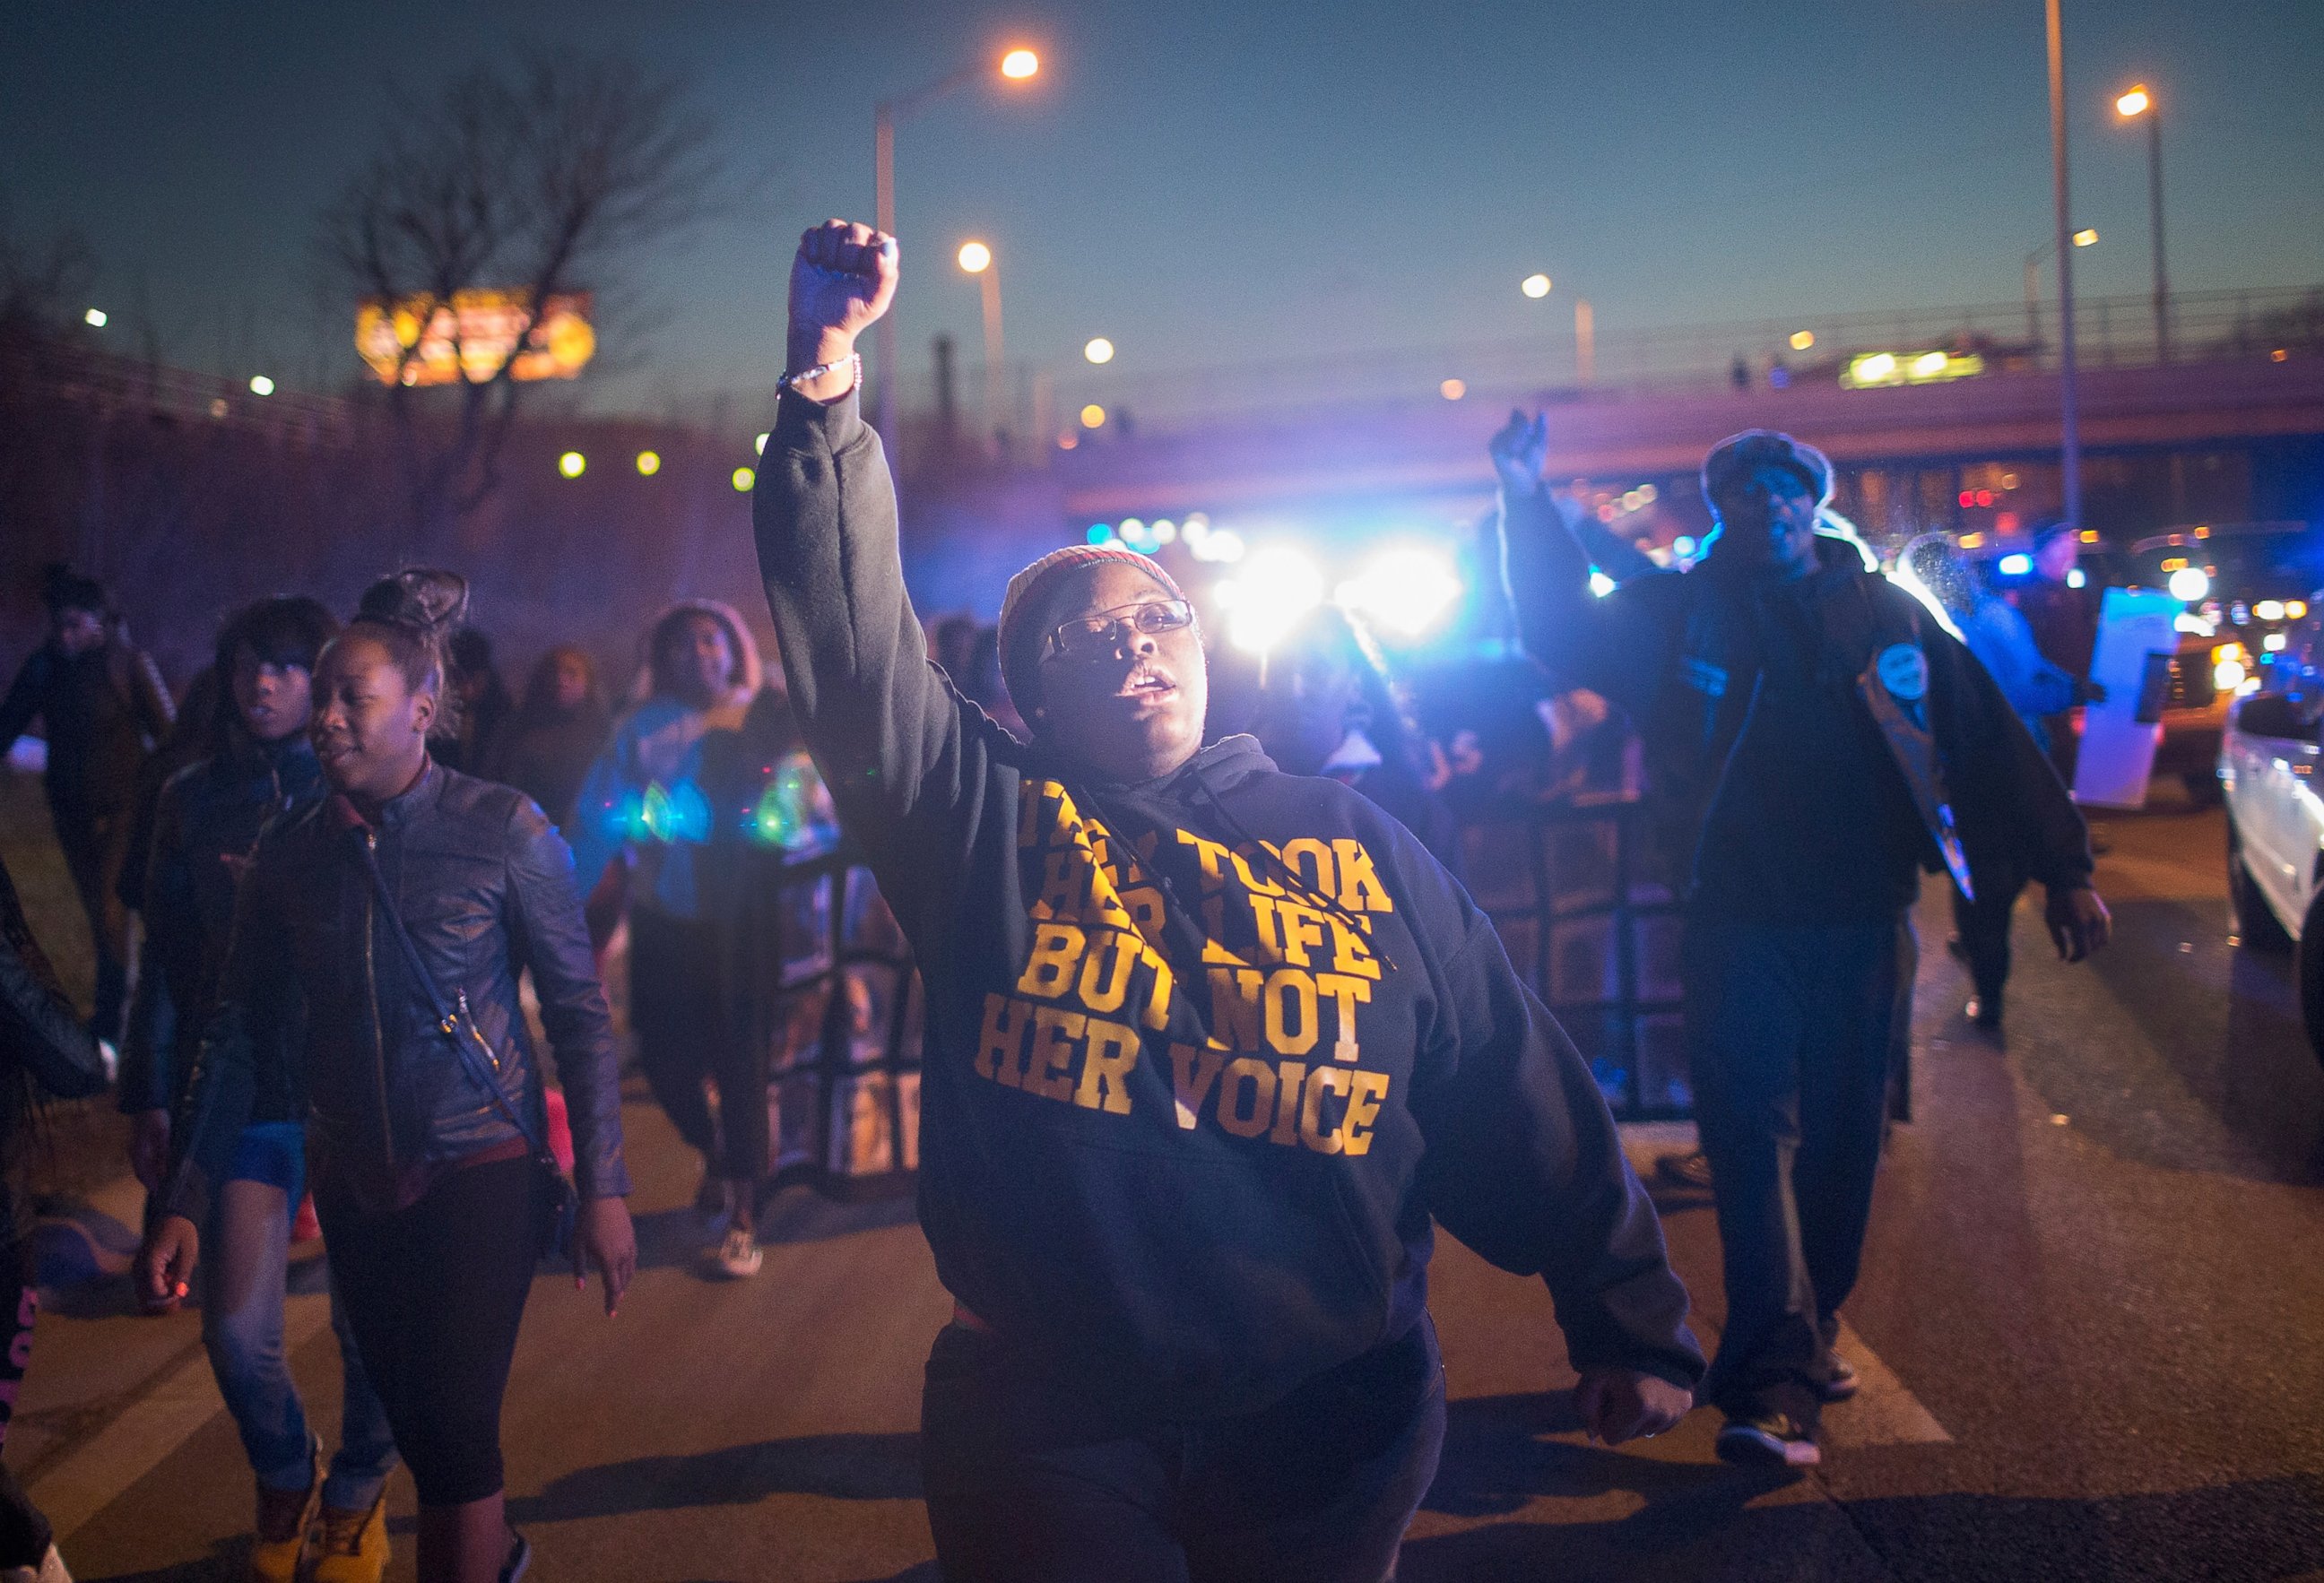 PHOTO: Demonstrators protesting the shooting death of 16-year-old Pierre Loury block traffic on the Eisenhower Expressway during a march, April 12, 2016 in Chicago.